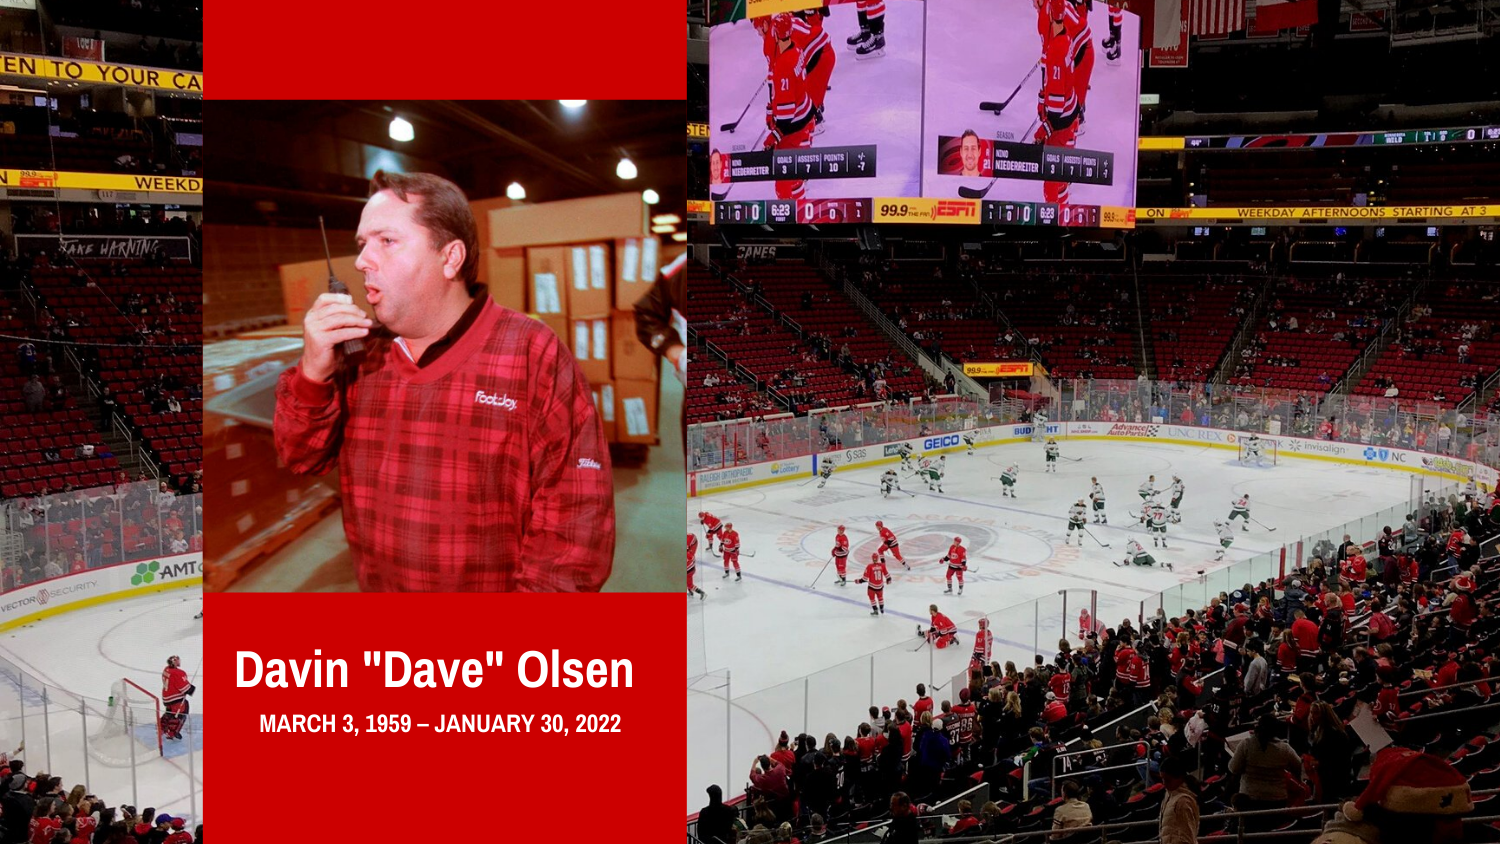 Davin "Dave" Olsen - Remembering Dave Olsen, Early Advocate for Sport and Entertainment - Parks Recreation and Tourism Management NC State University